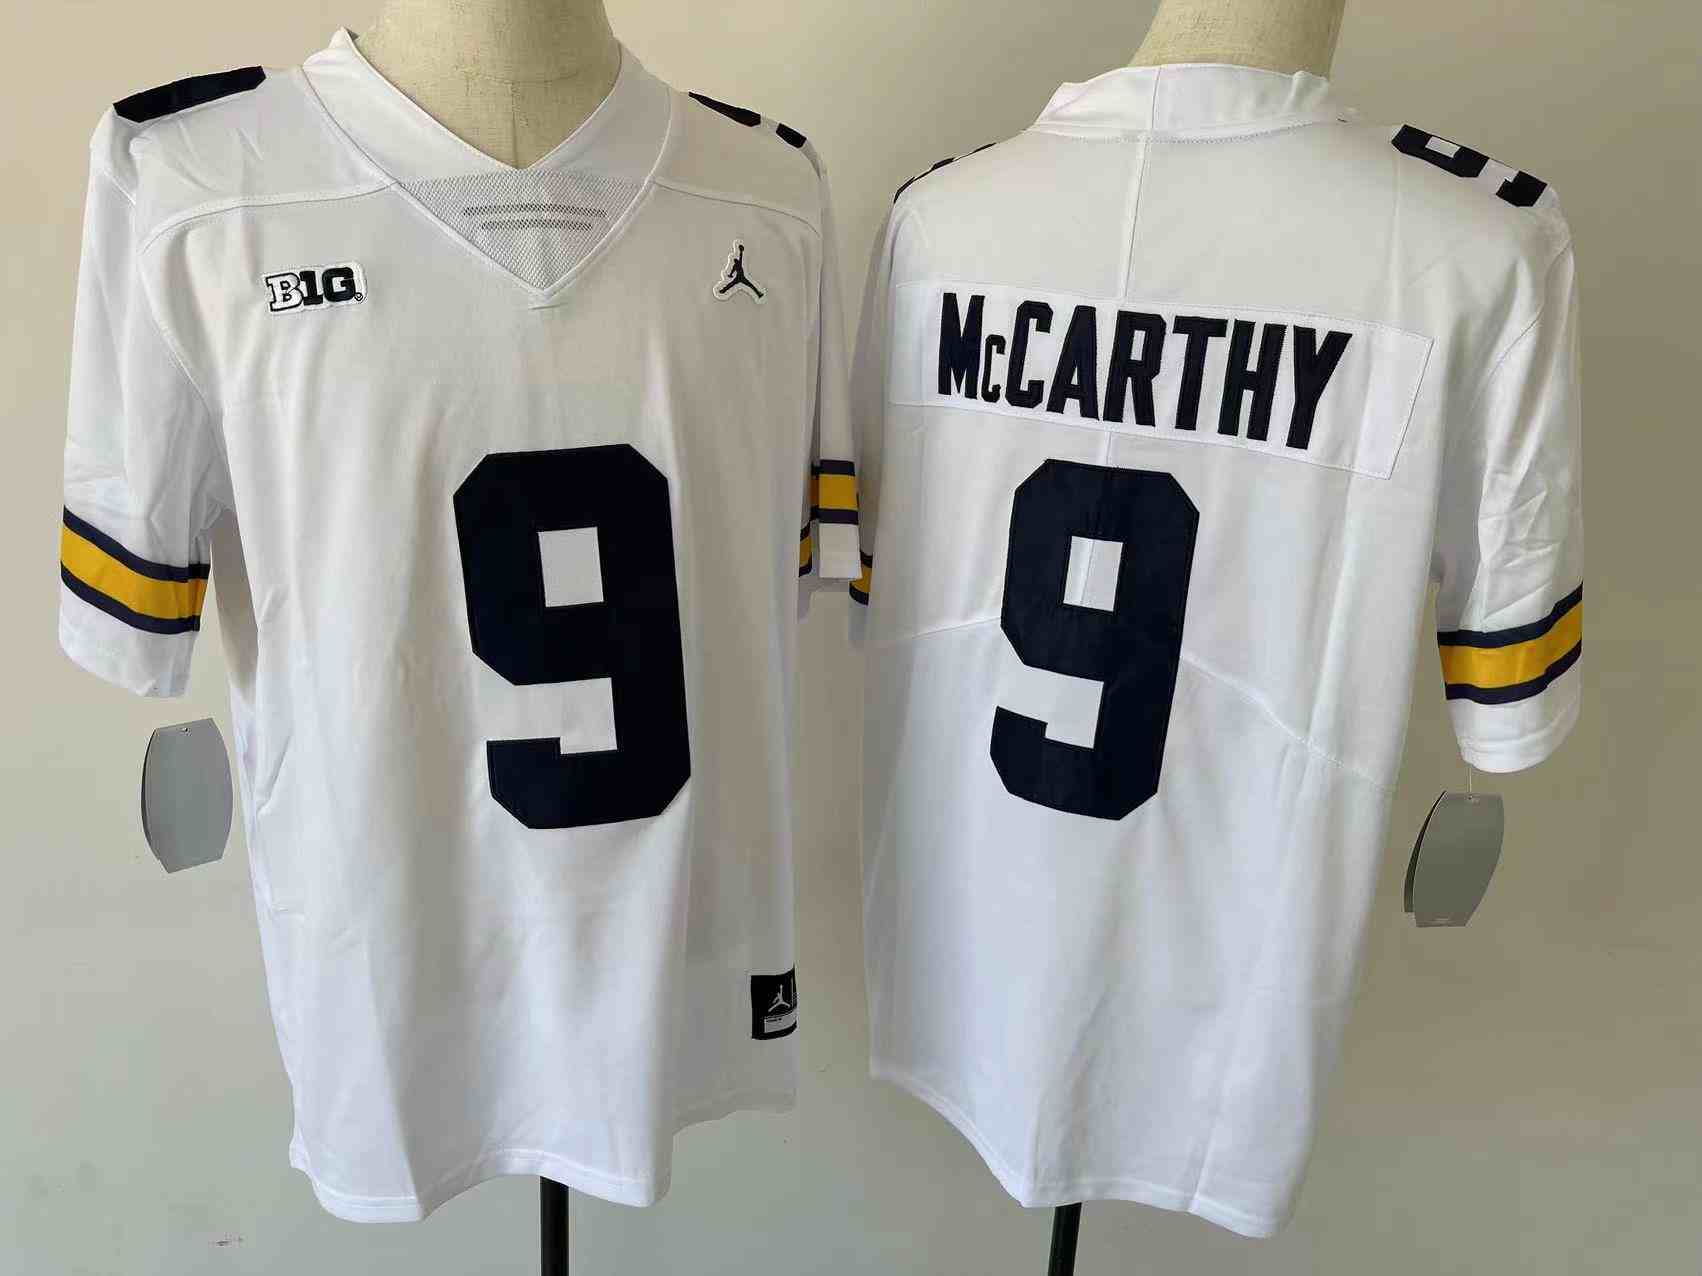 Youth Michigan Wolverines #9 McCARTHY White Stitched Jersey